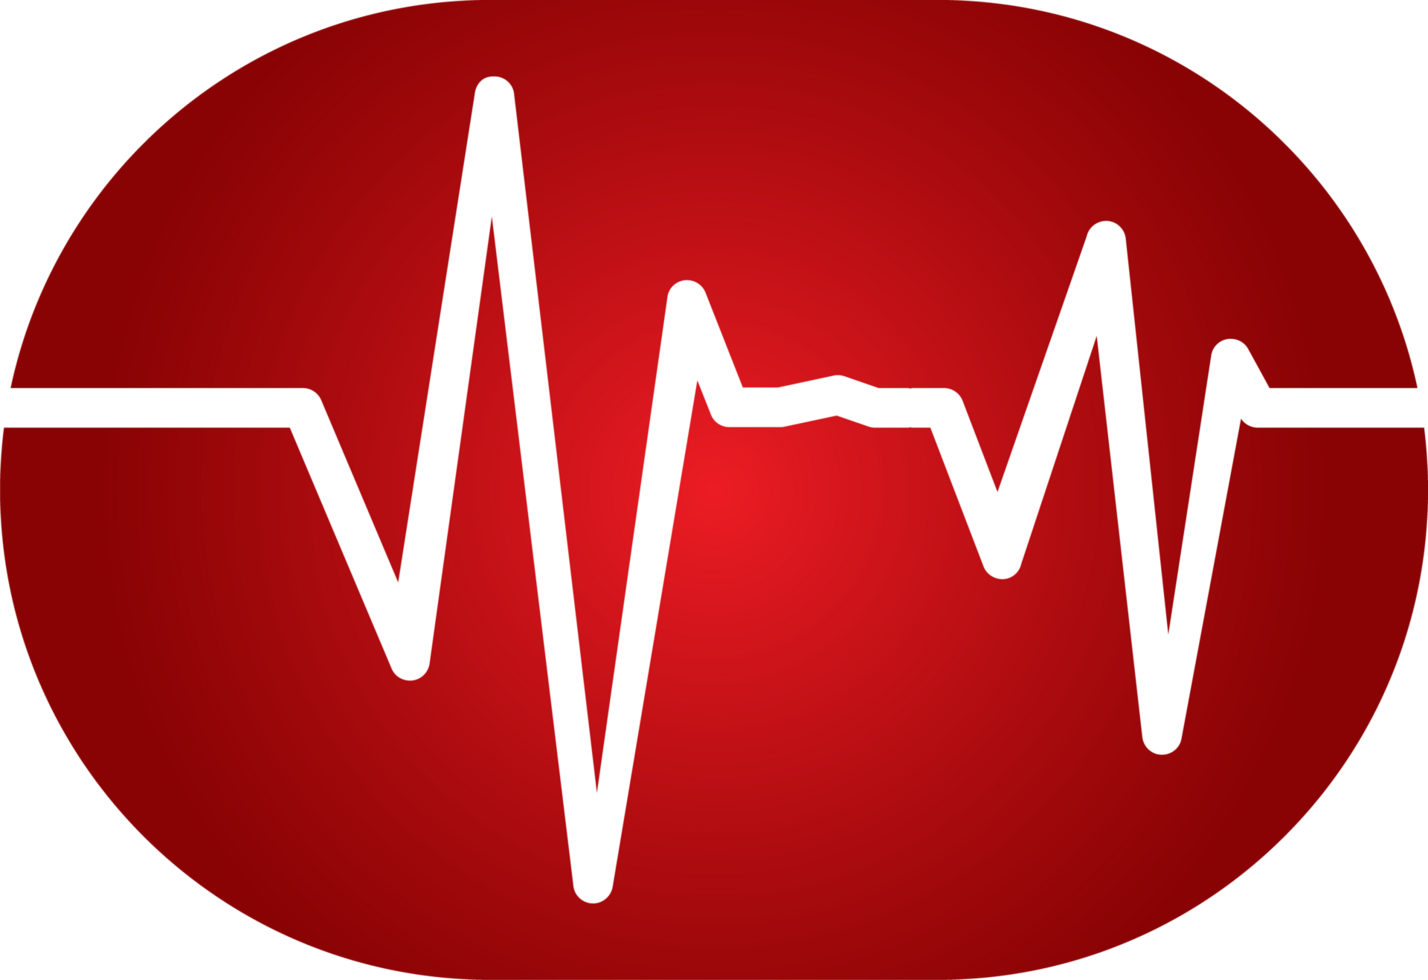 Creative medical icon design. Blood drop and pulse rate icon design. The medical red icon with red surface and heart rate illustration. png